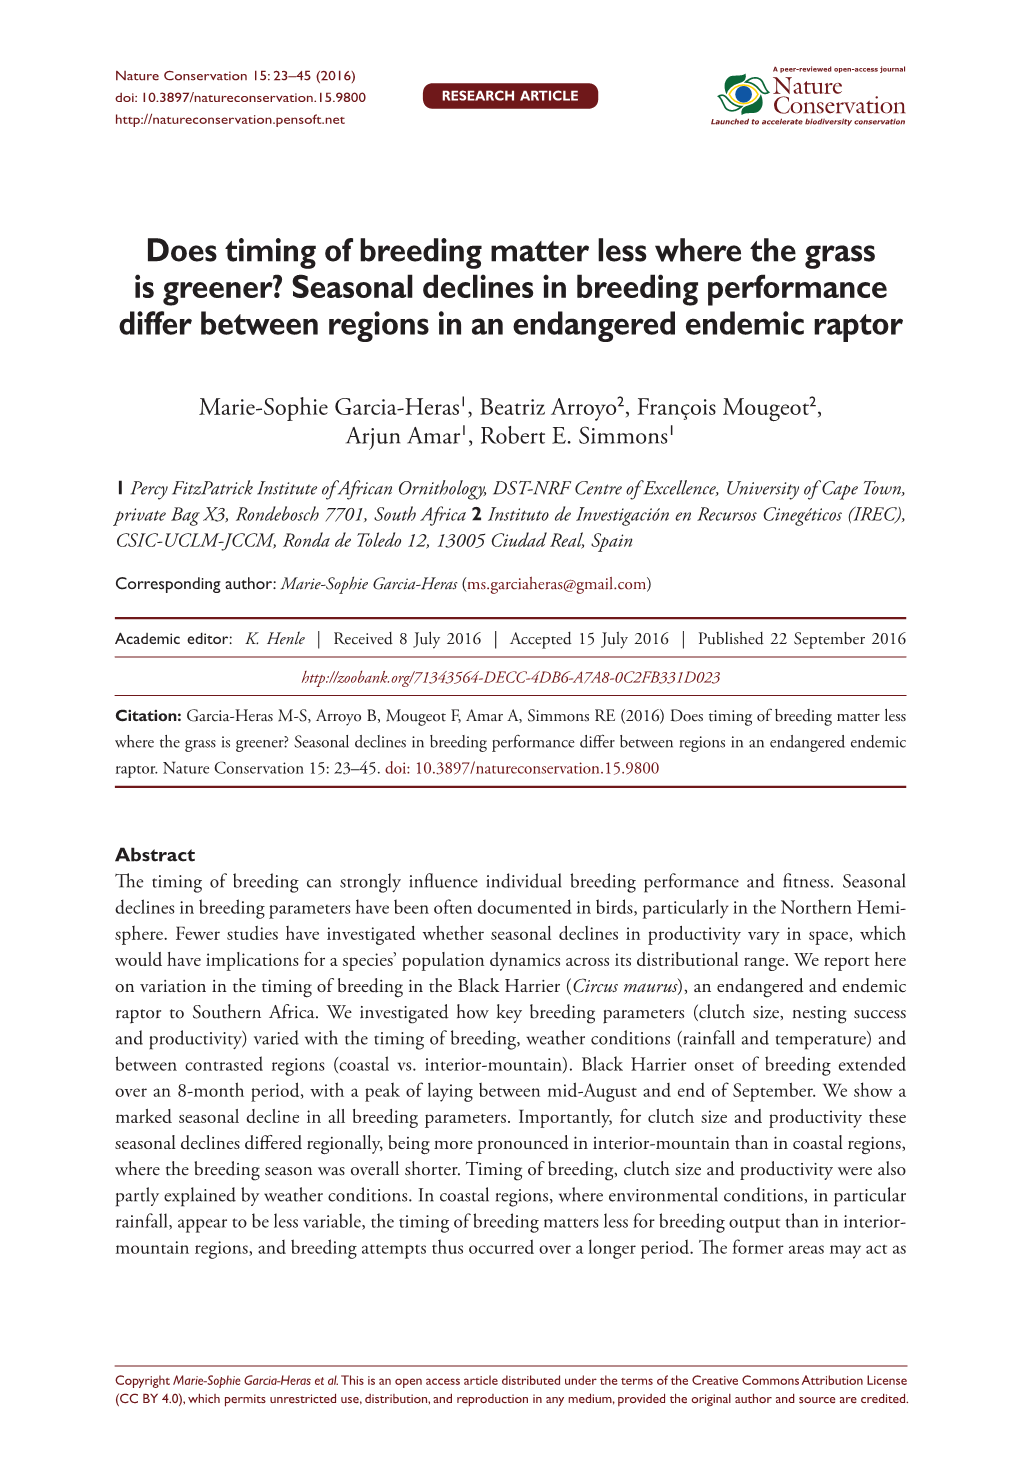 Does Timing of Breeding Matter Less Where the Grass Is Greener? Seasonal Declines in Breeding Performance Differ Between Regions in an Endangered Endemic Raptor